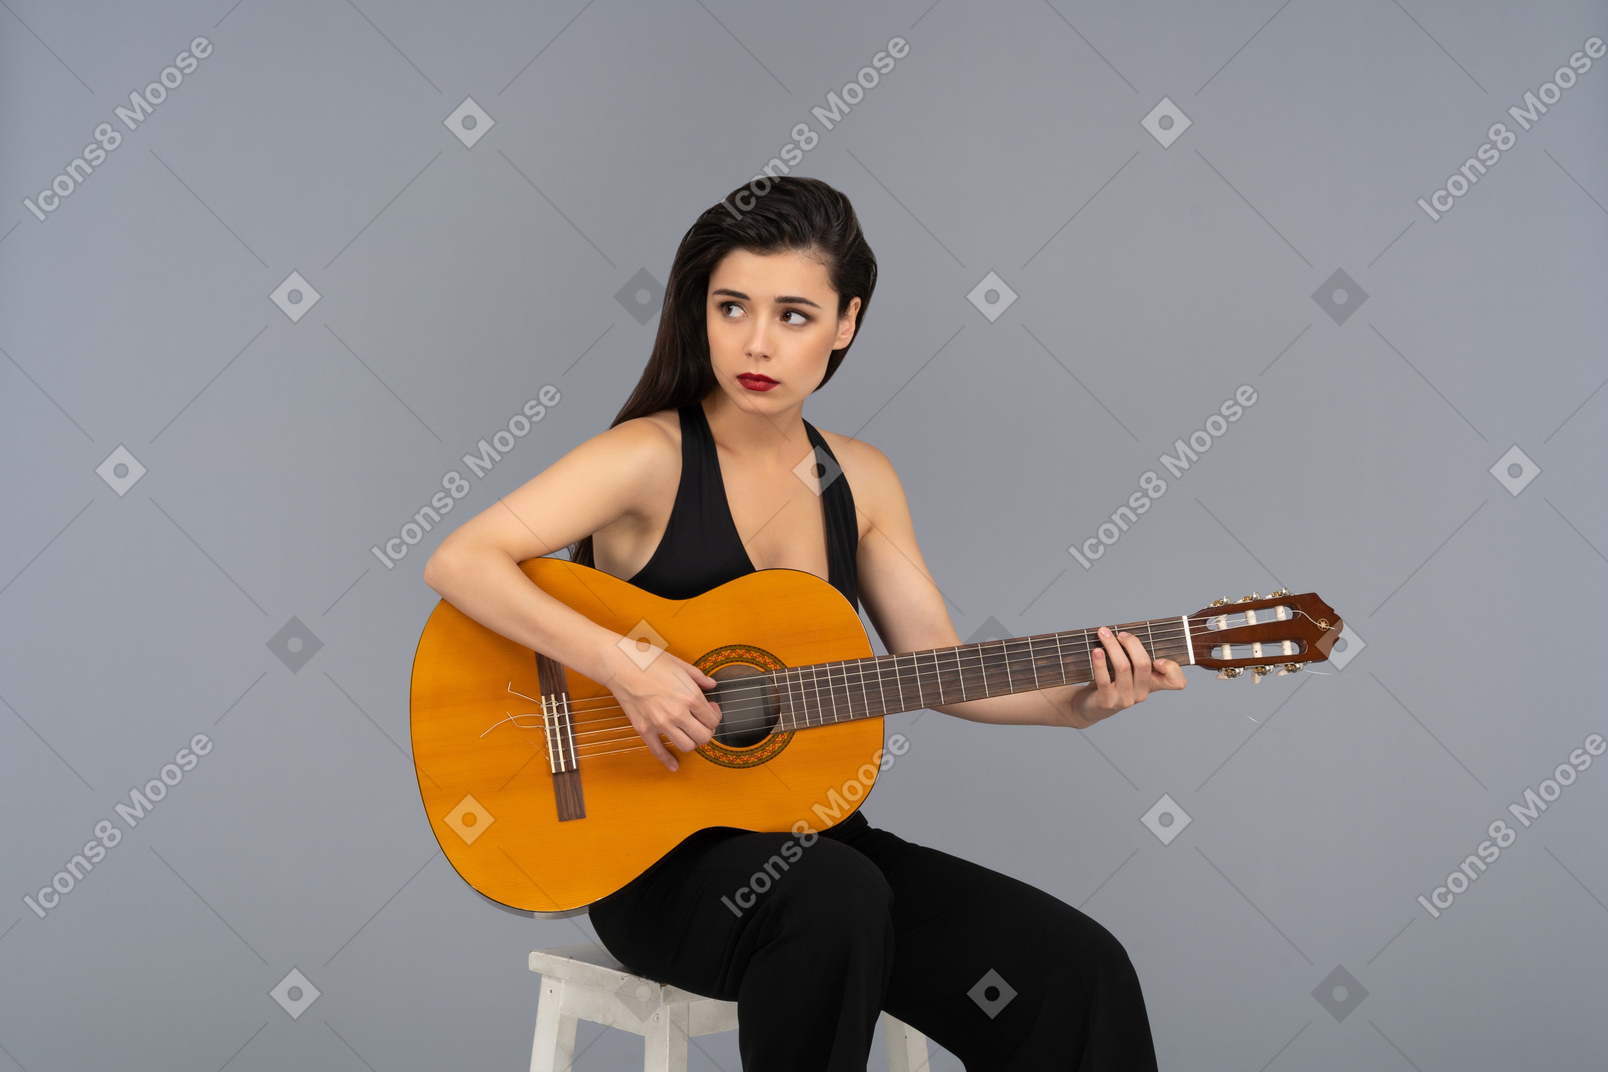 Pretty young woman playing guitar